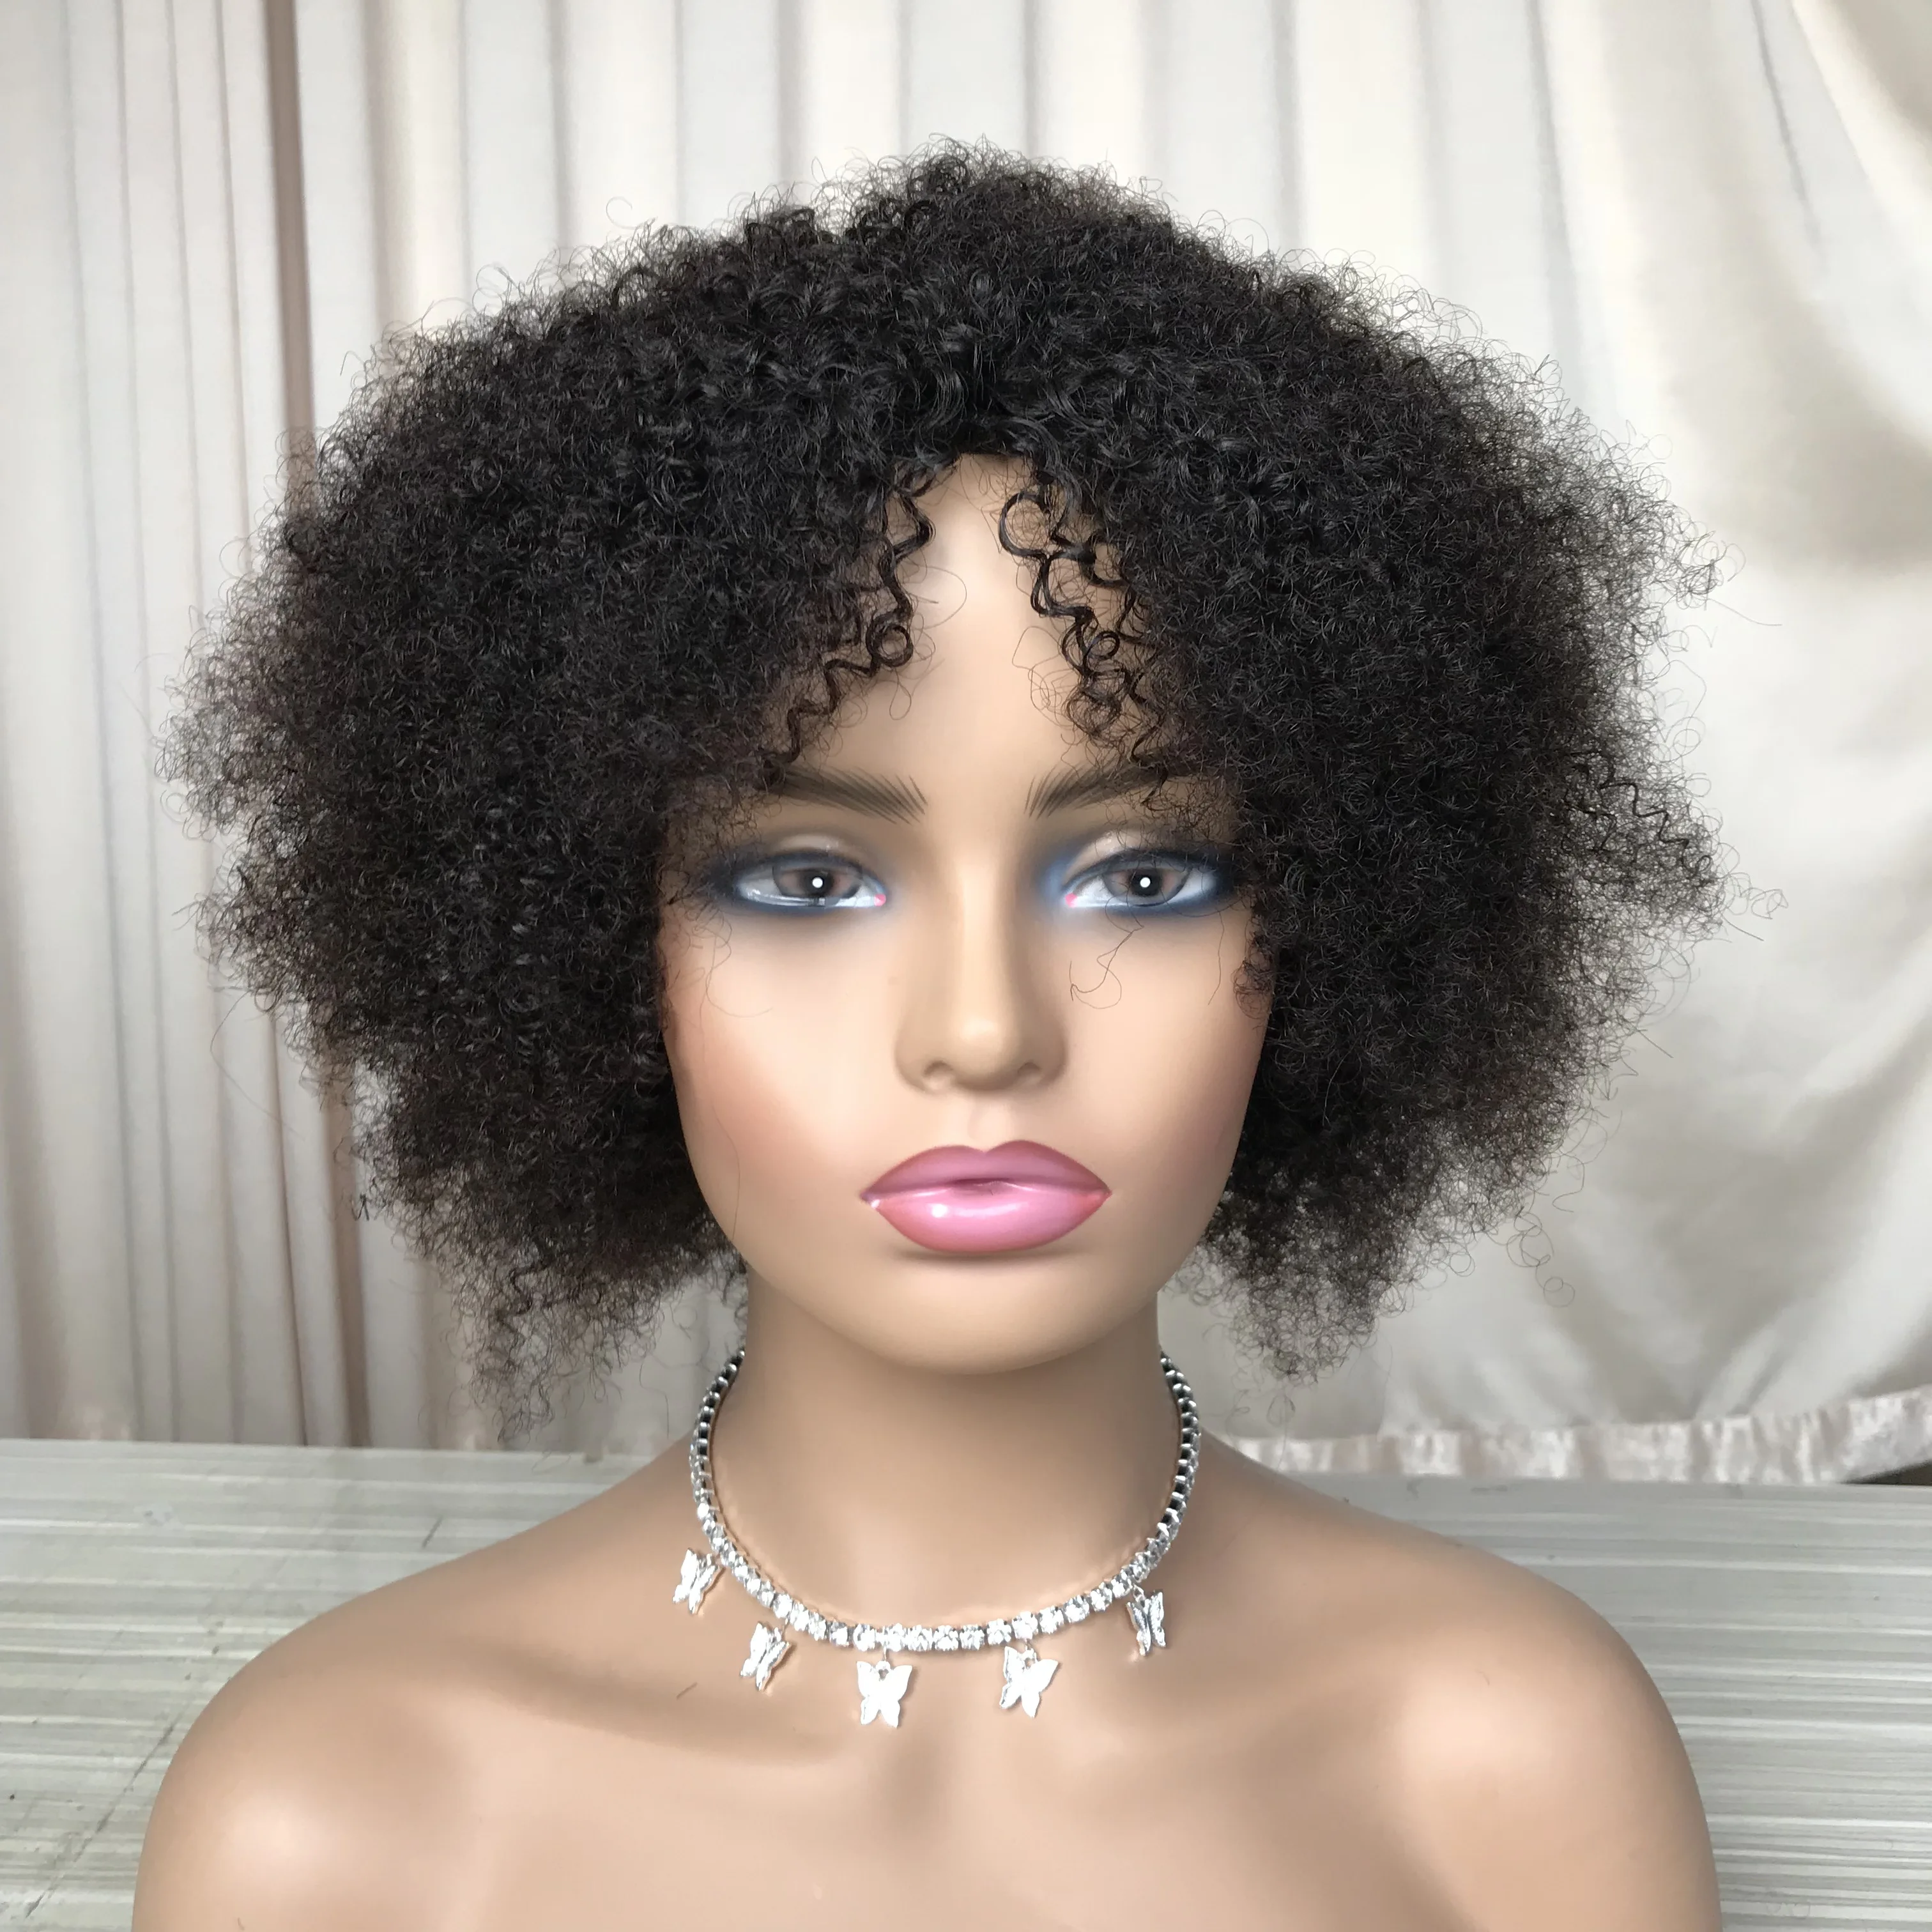 

Human Hair Wigs Brazilian Virgin Hair Kinky Curly None Lace Wig On Sale 10A High Quality Hair Wigs